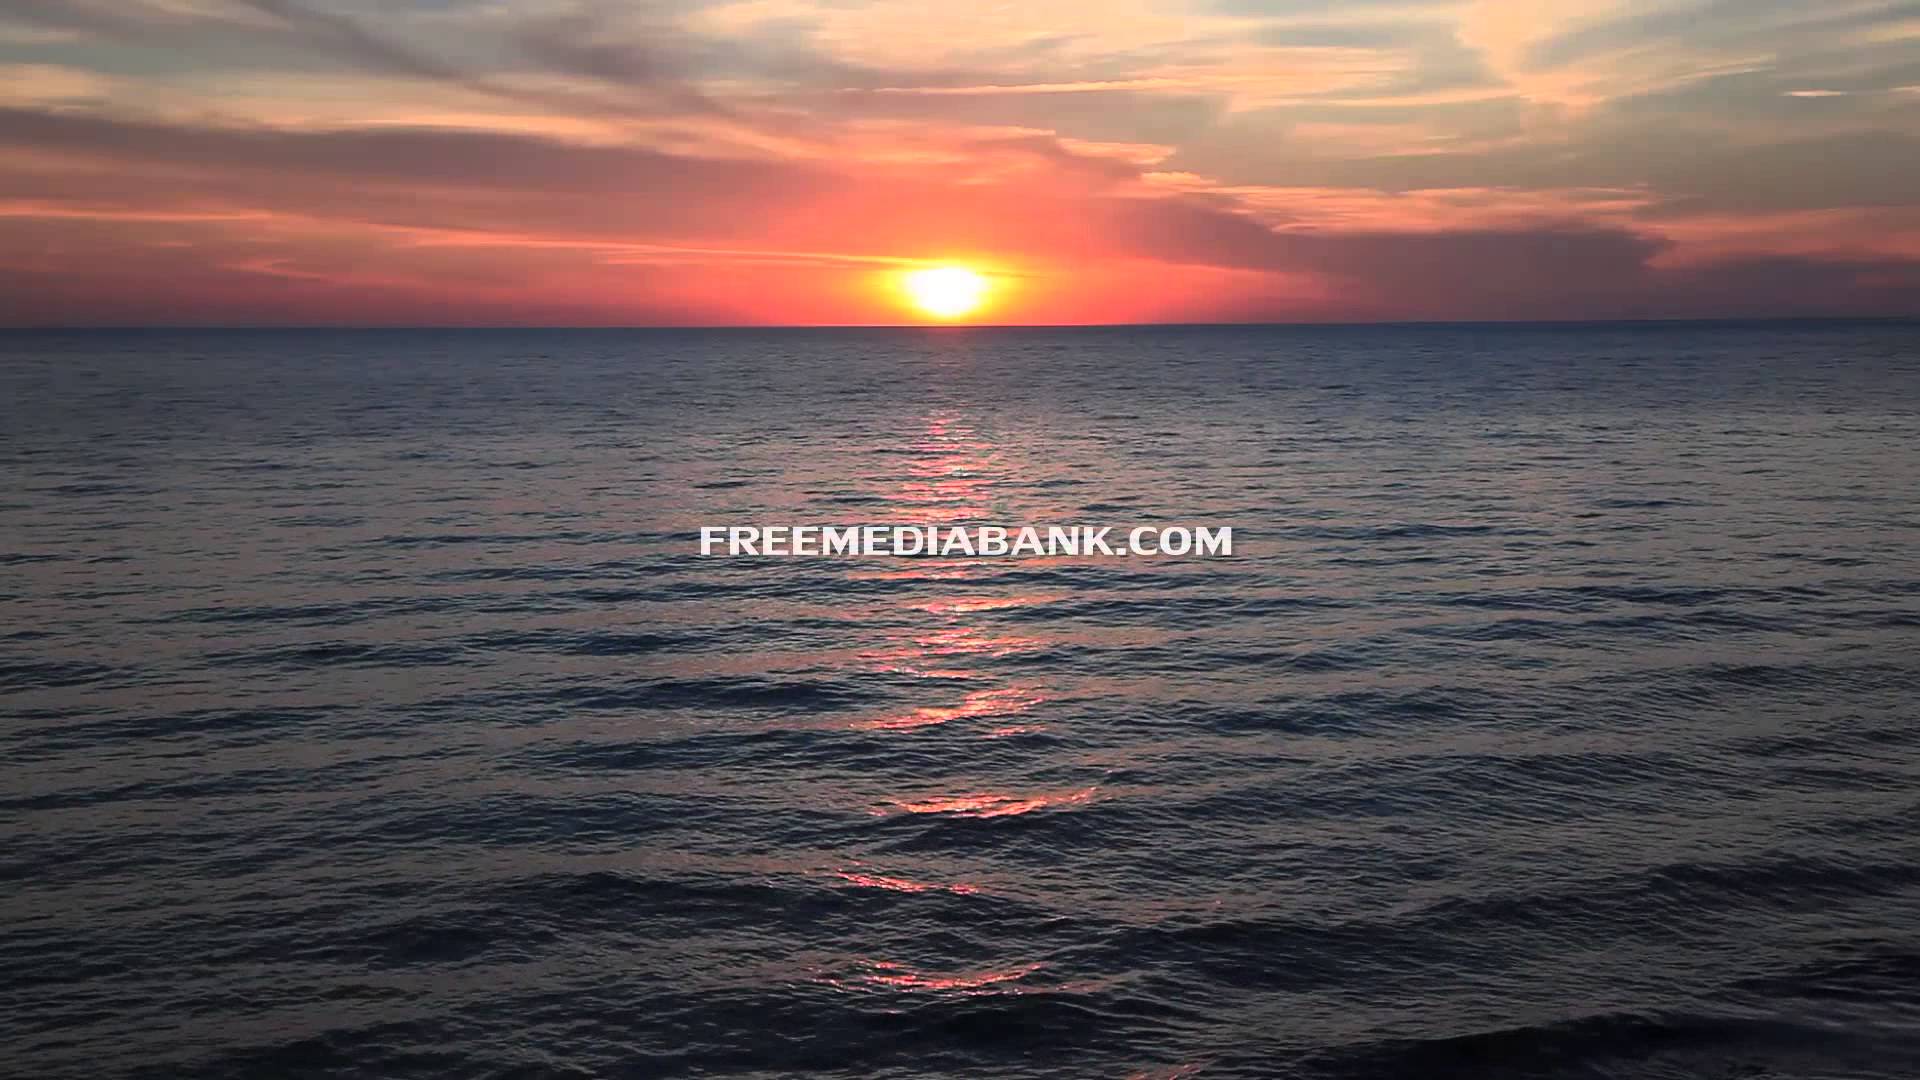 Sunset at sea. Free HD stock footage. - YouTube